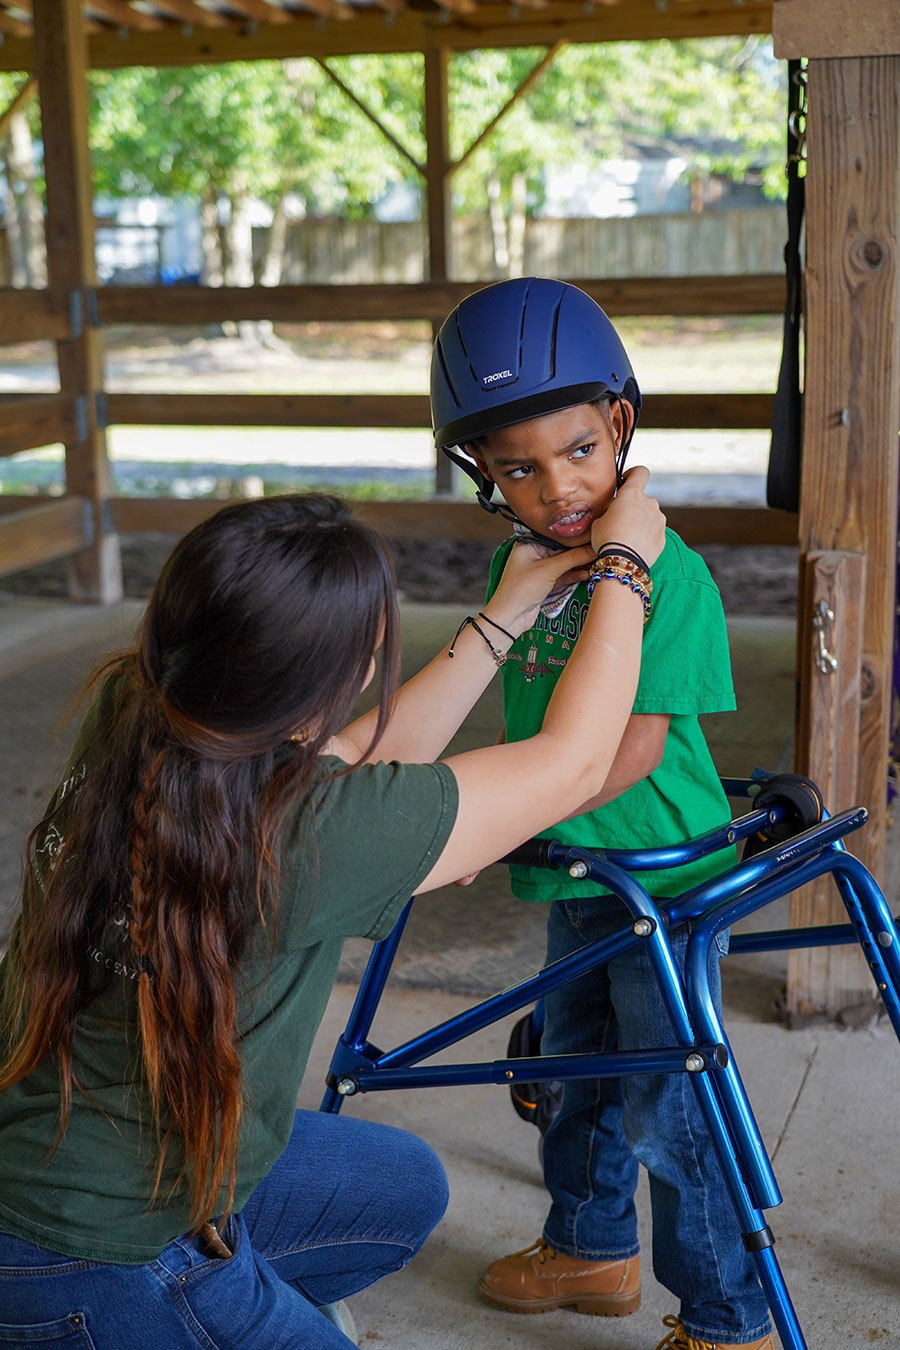 picture of Jaxon, a young rider being assisted with a helmet